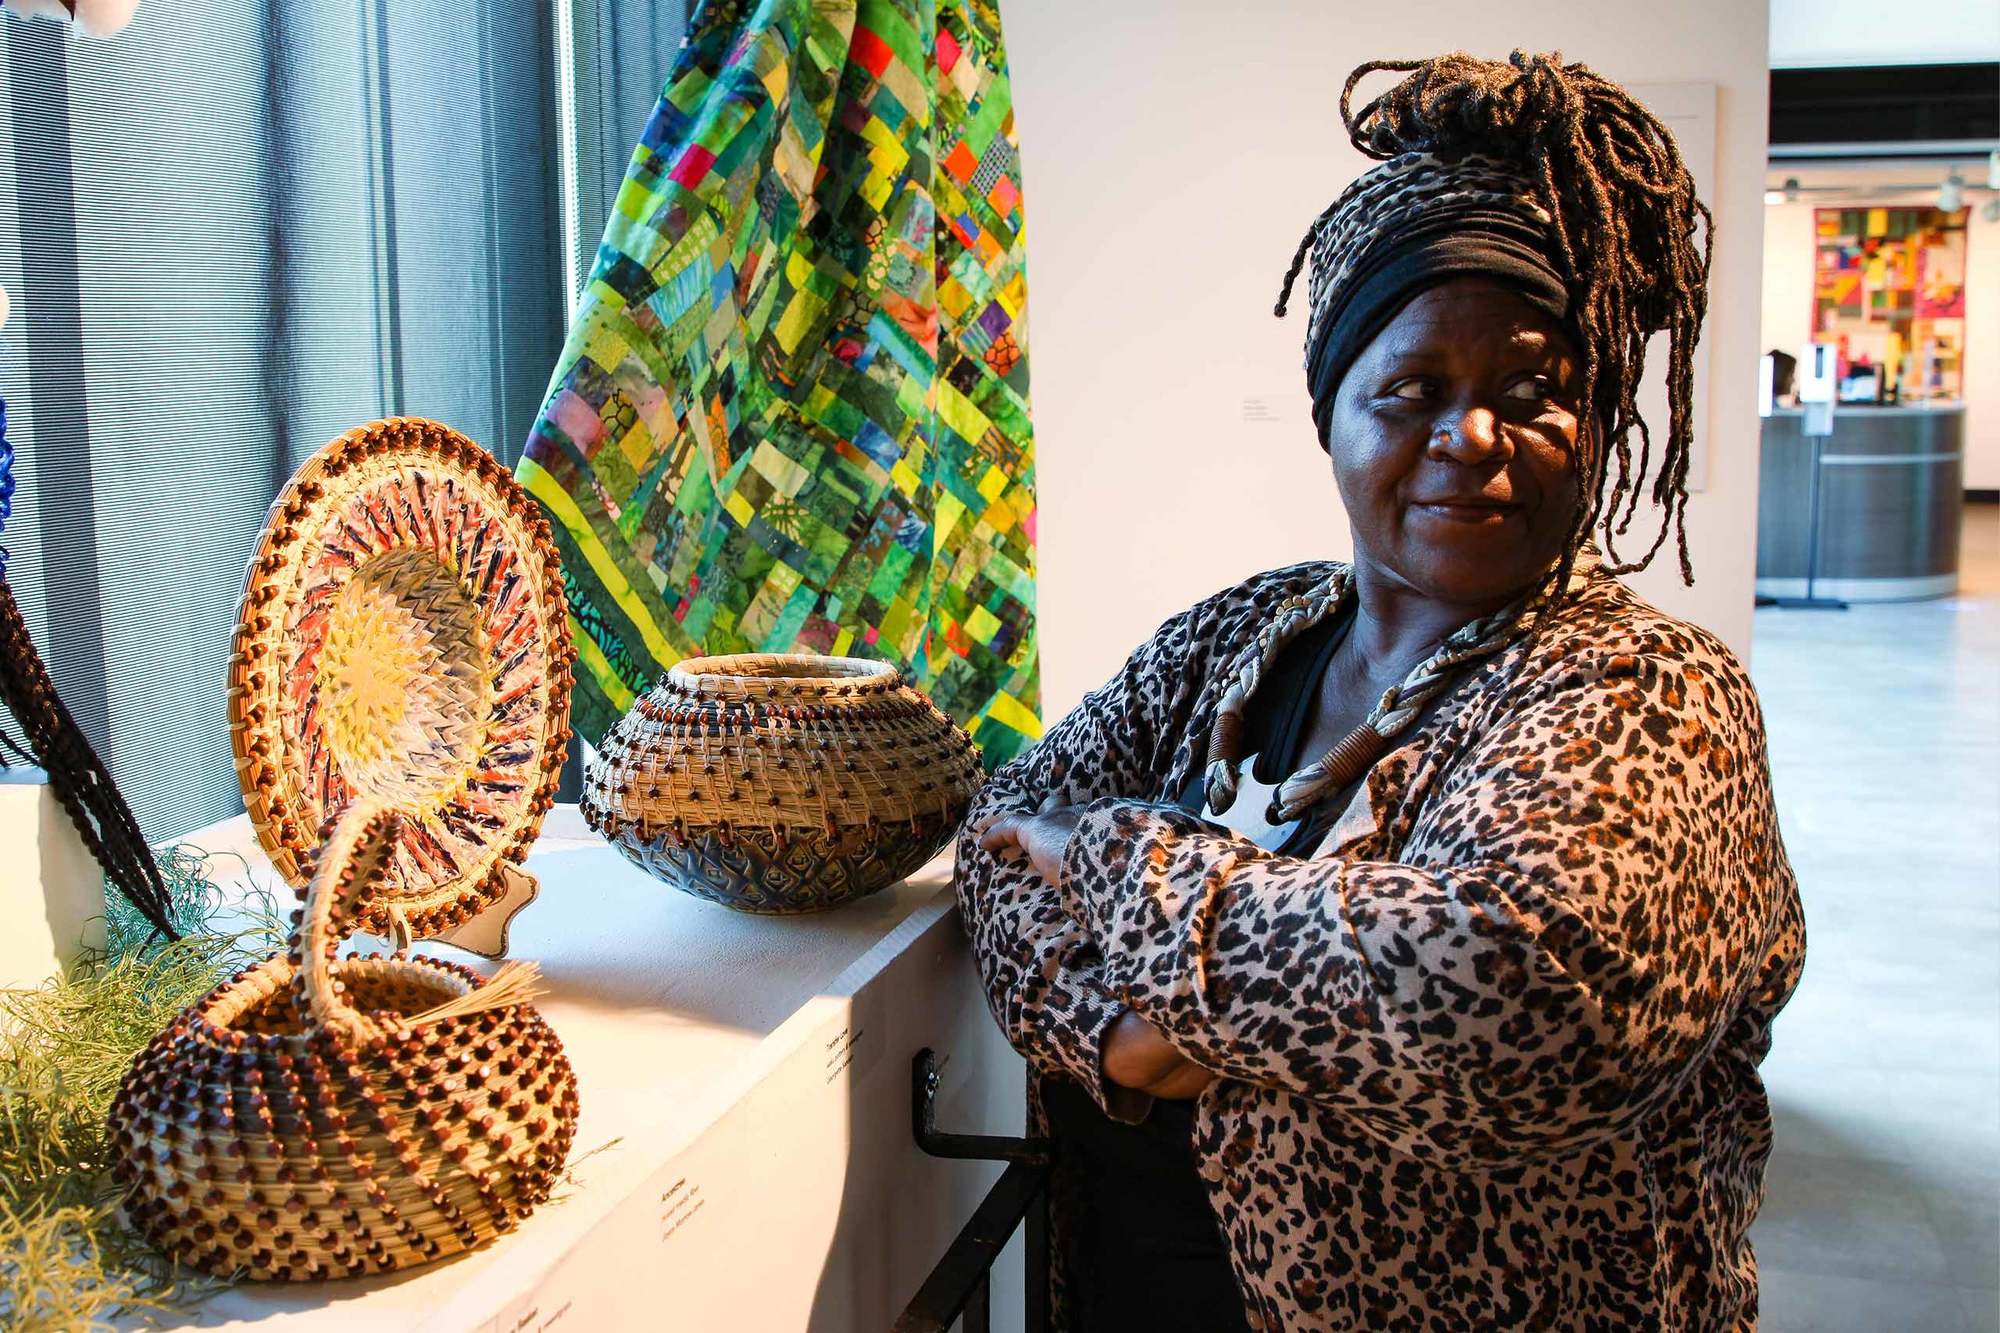 Georgette Sanders crosses her arms and looks away from bowls and art on display with quilt in the background March 2022.